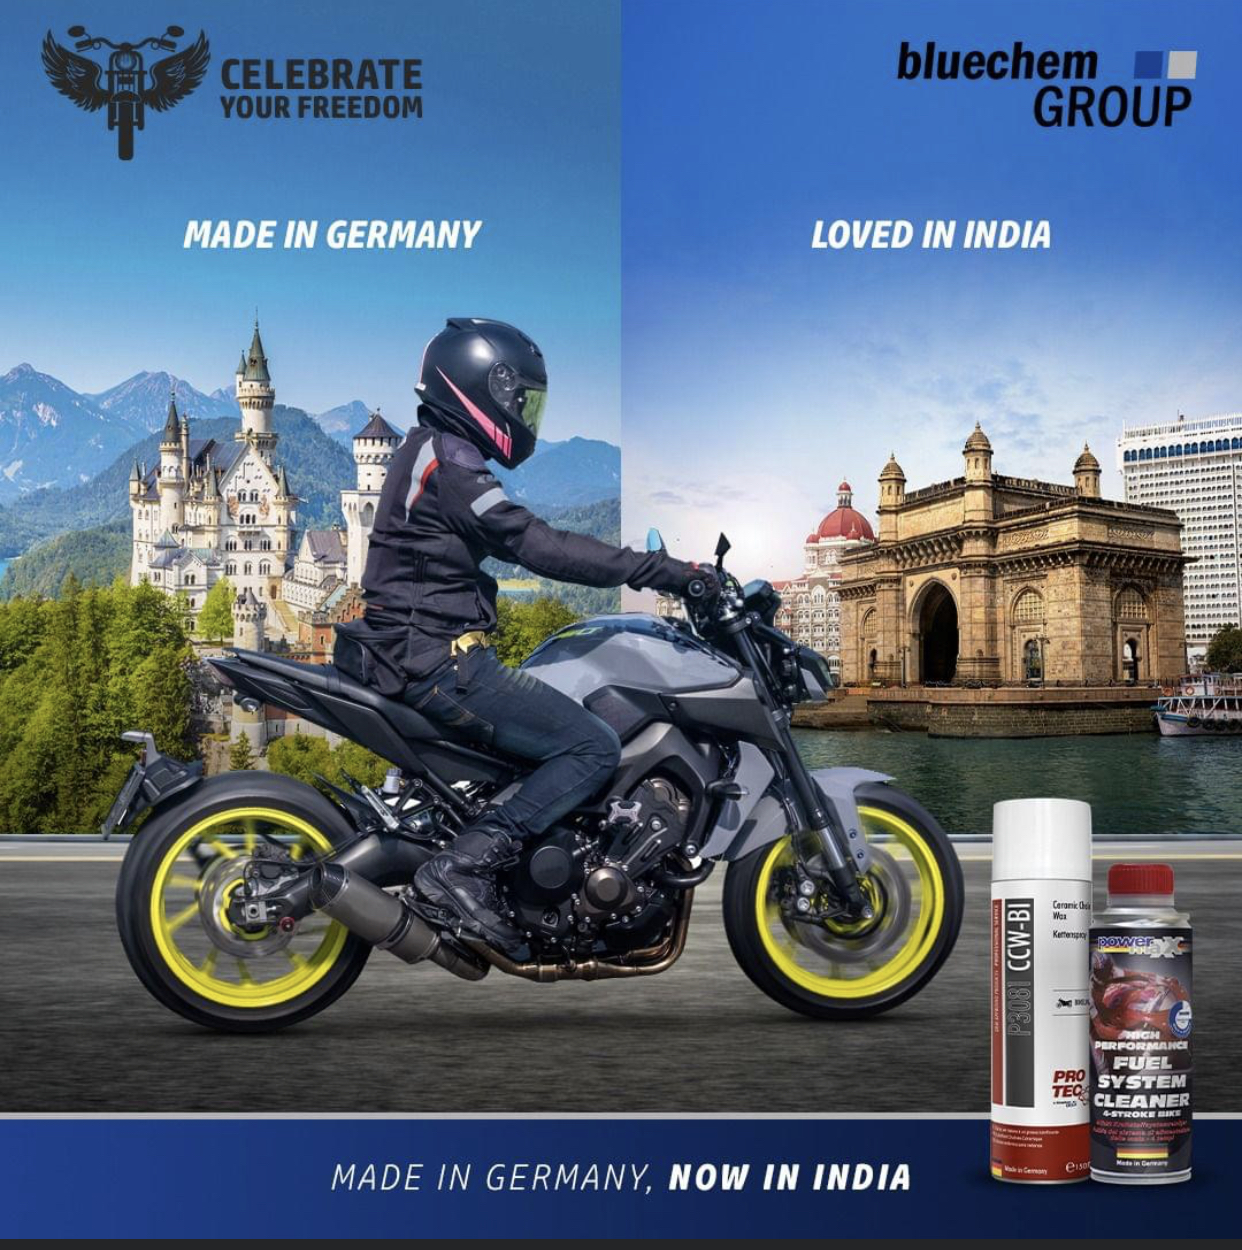 Bluechem Group India offers excellent German technology products